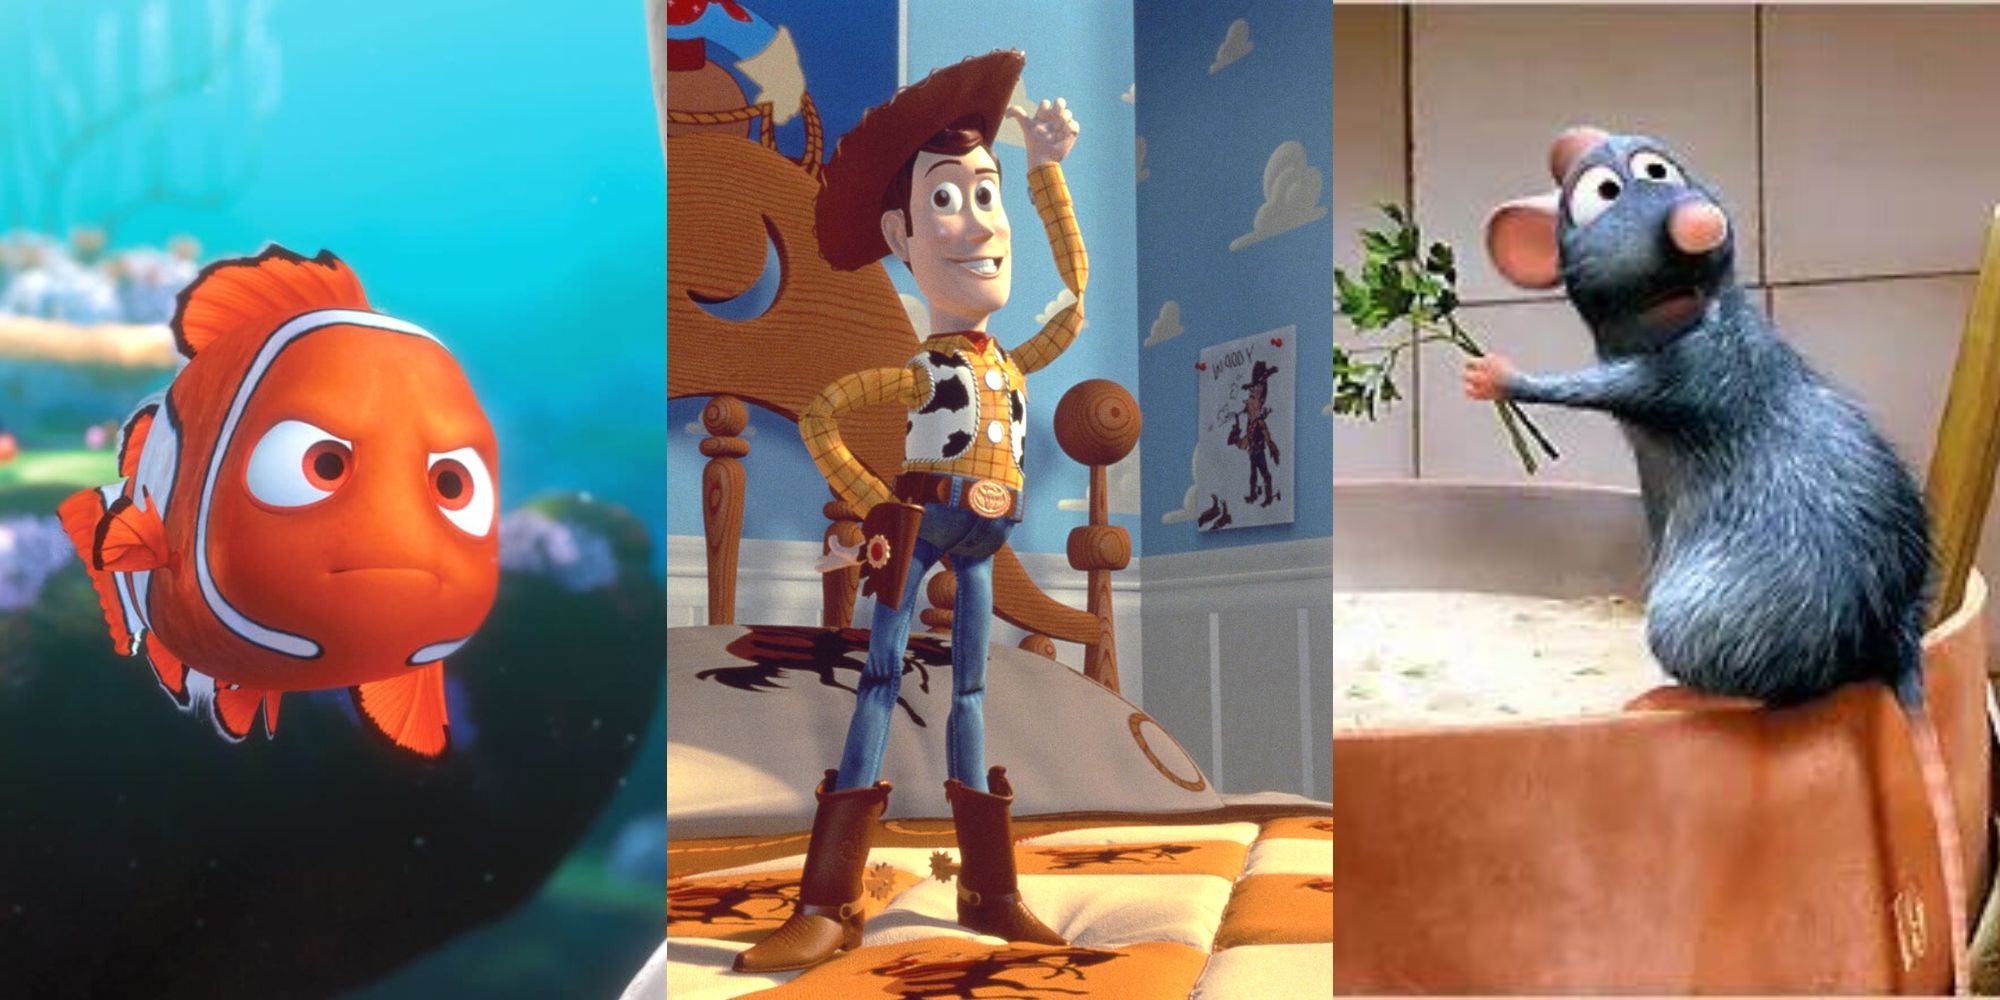 Nemo in Finding Nemo, Woody in Toy Story, Remy in Ratatouille